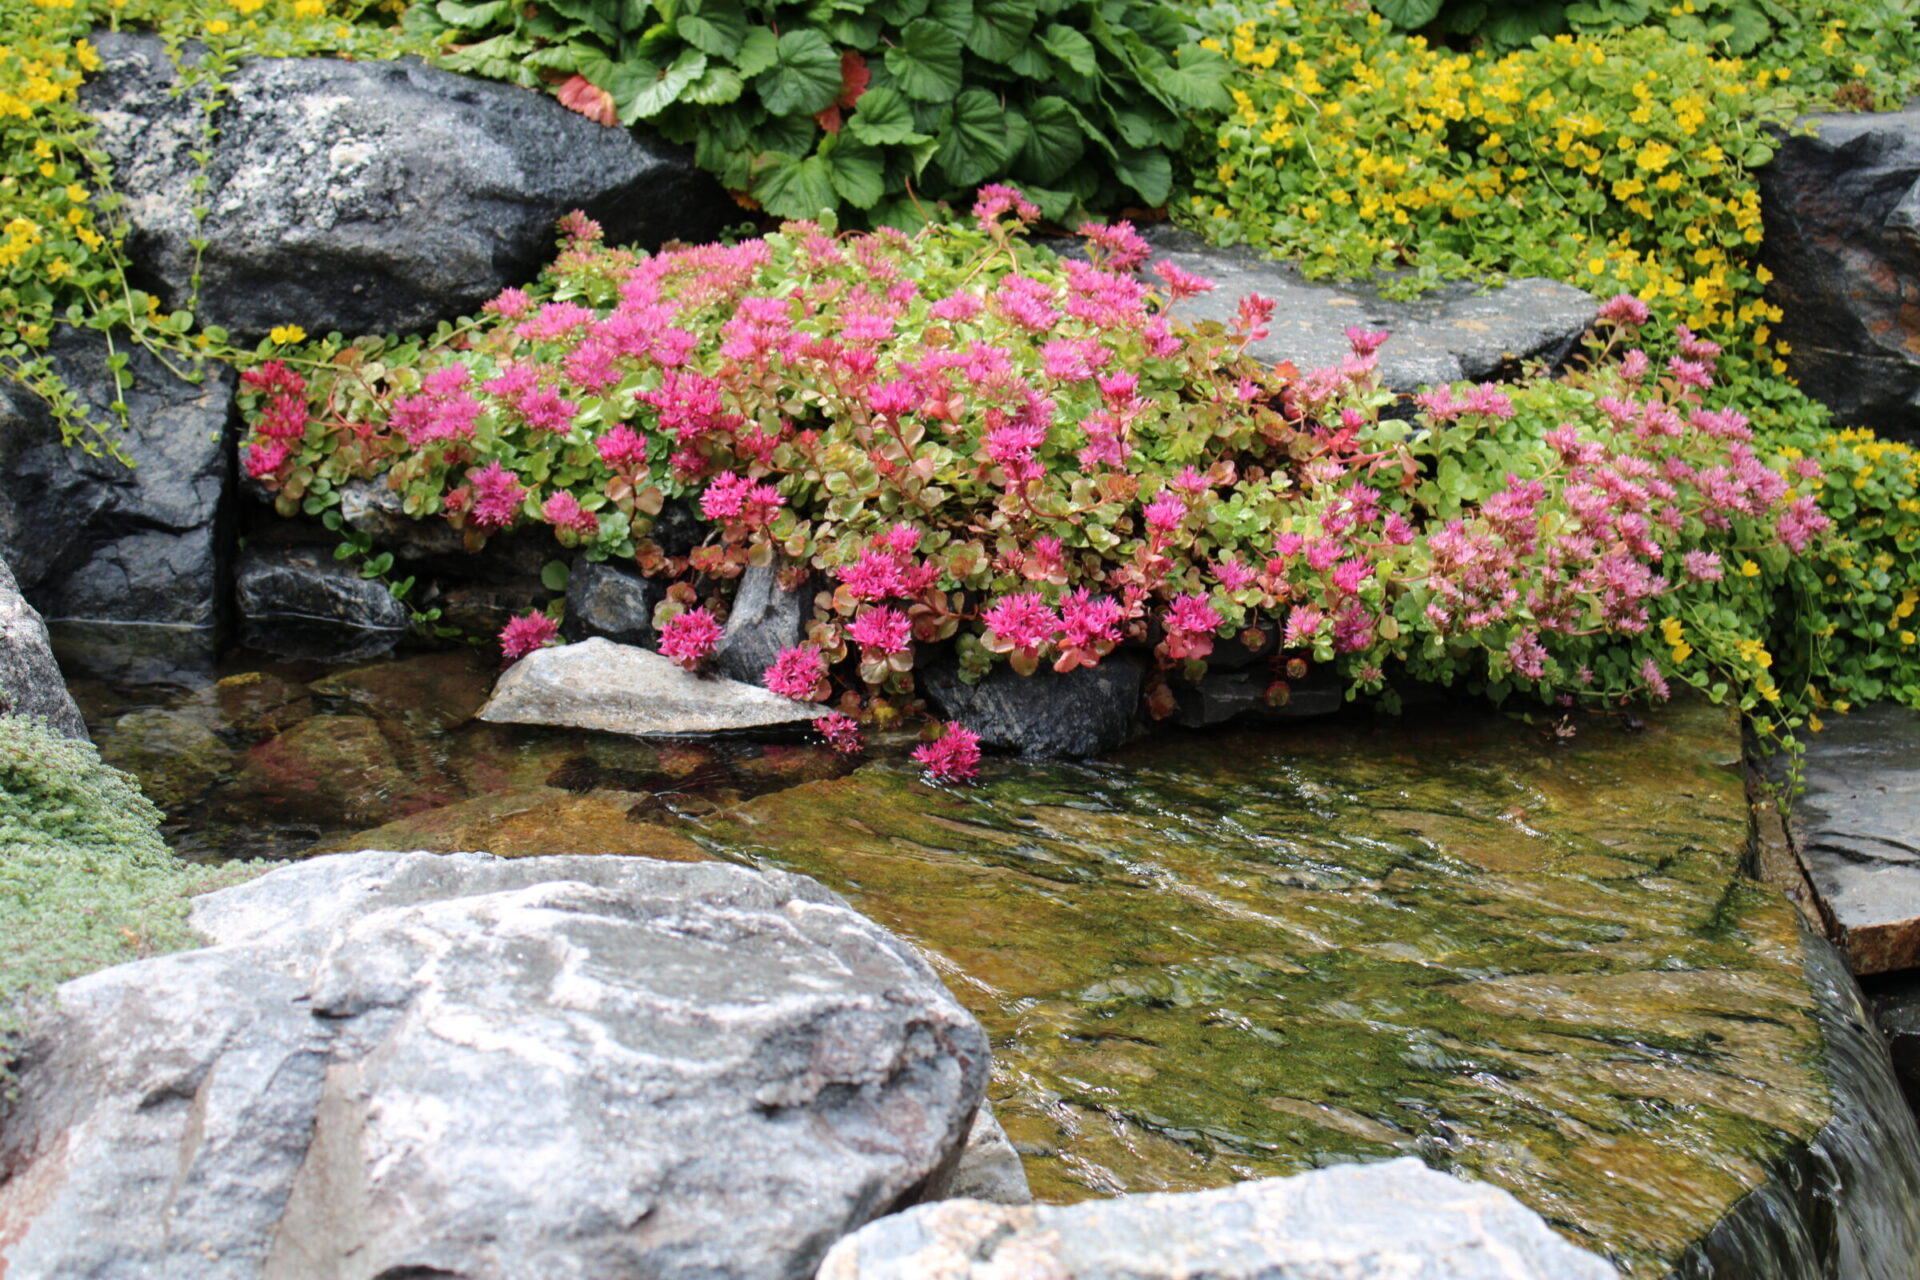 A natural scene with vibrant pink and yellow flowers growing among rocks above a clear, gently flowing stream with moss-covered stones visible beneath the water.